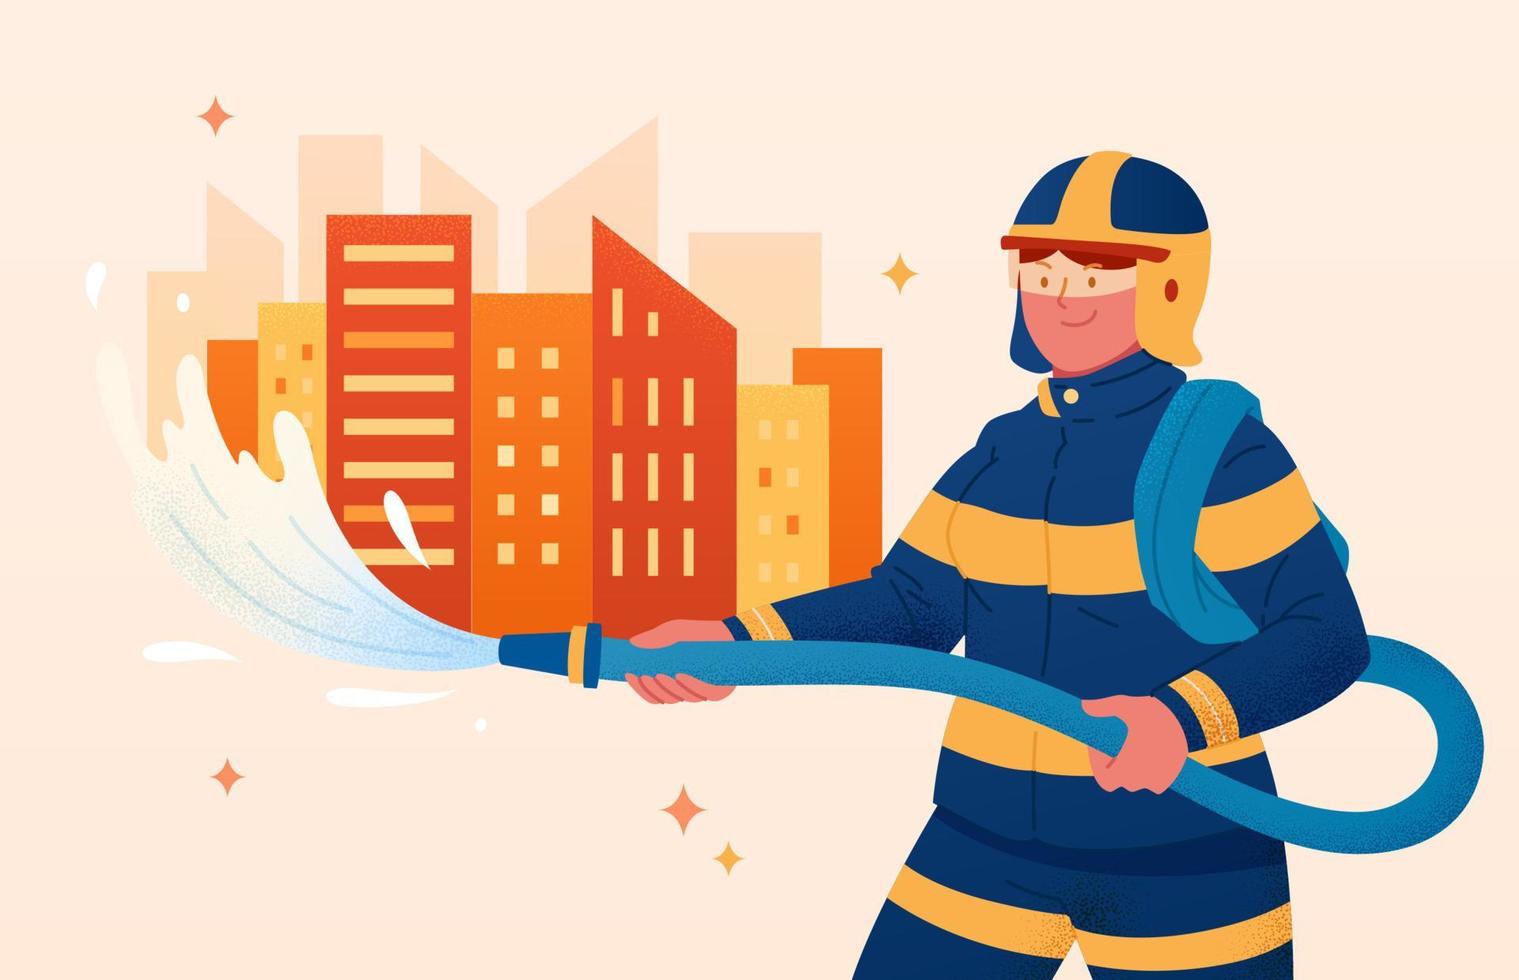 Female firefighter at work. Flat illustration of firewoman putting out fire with hose throwing water to skyscrapers on fire. vector